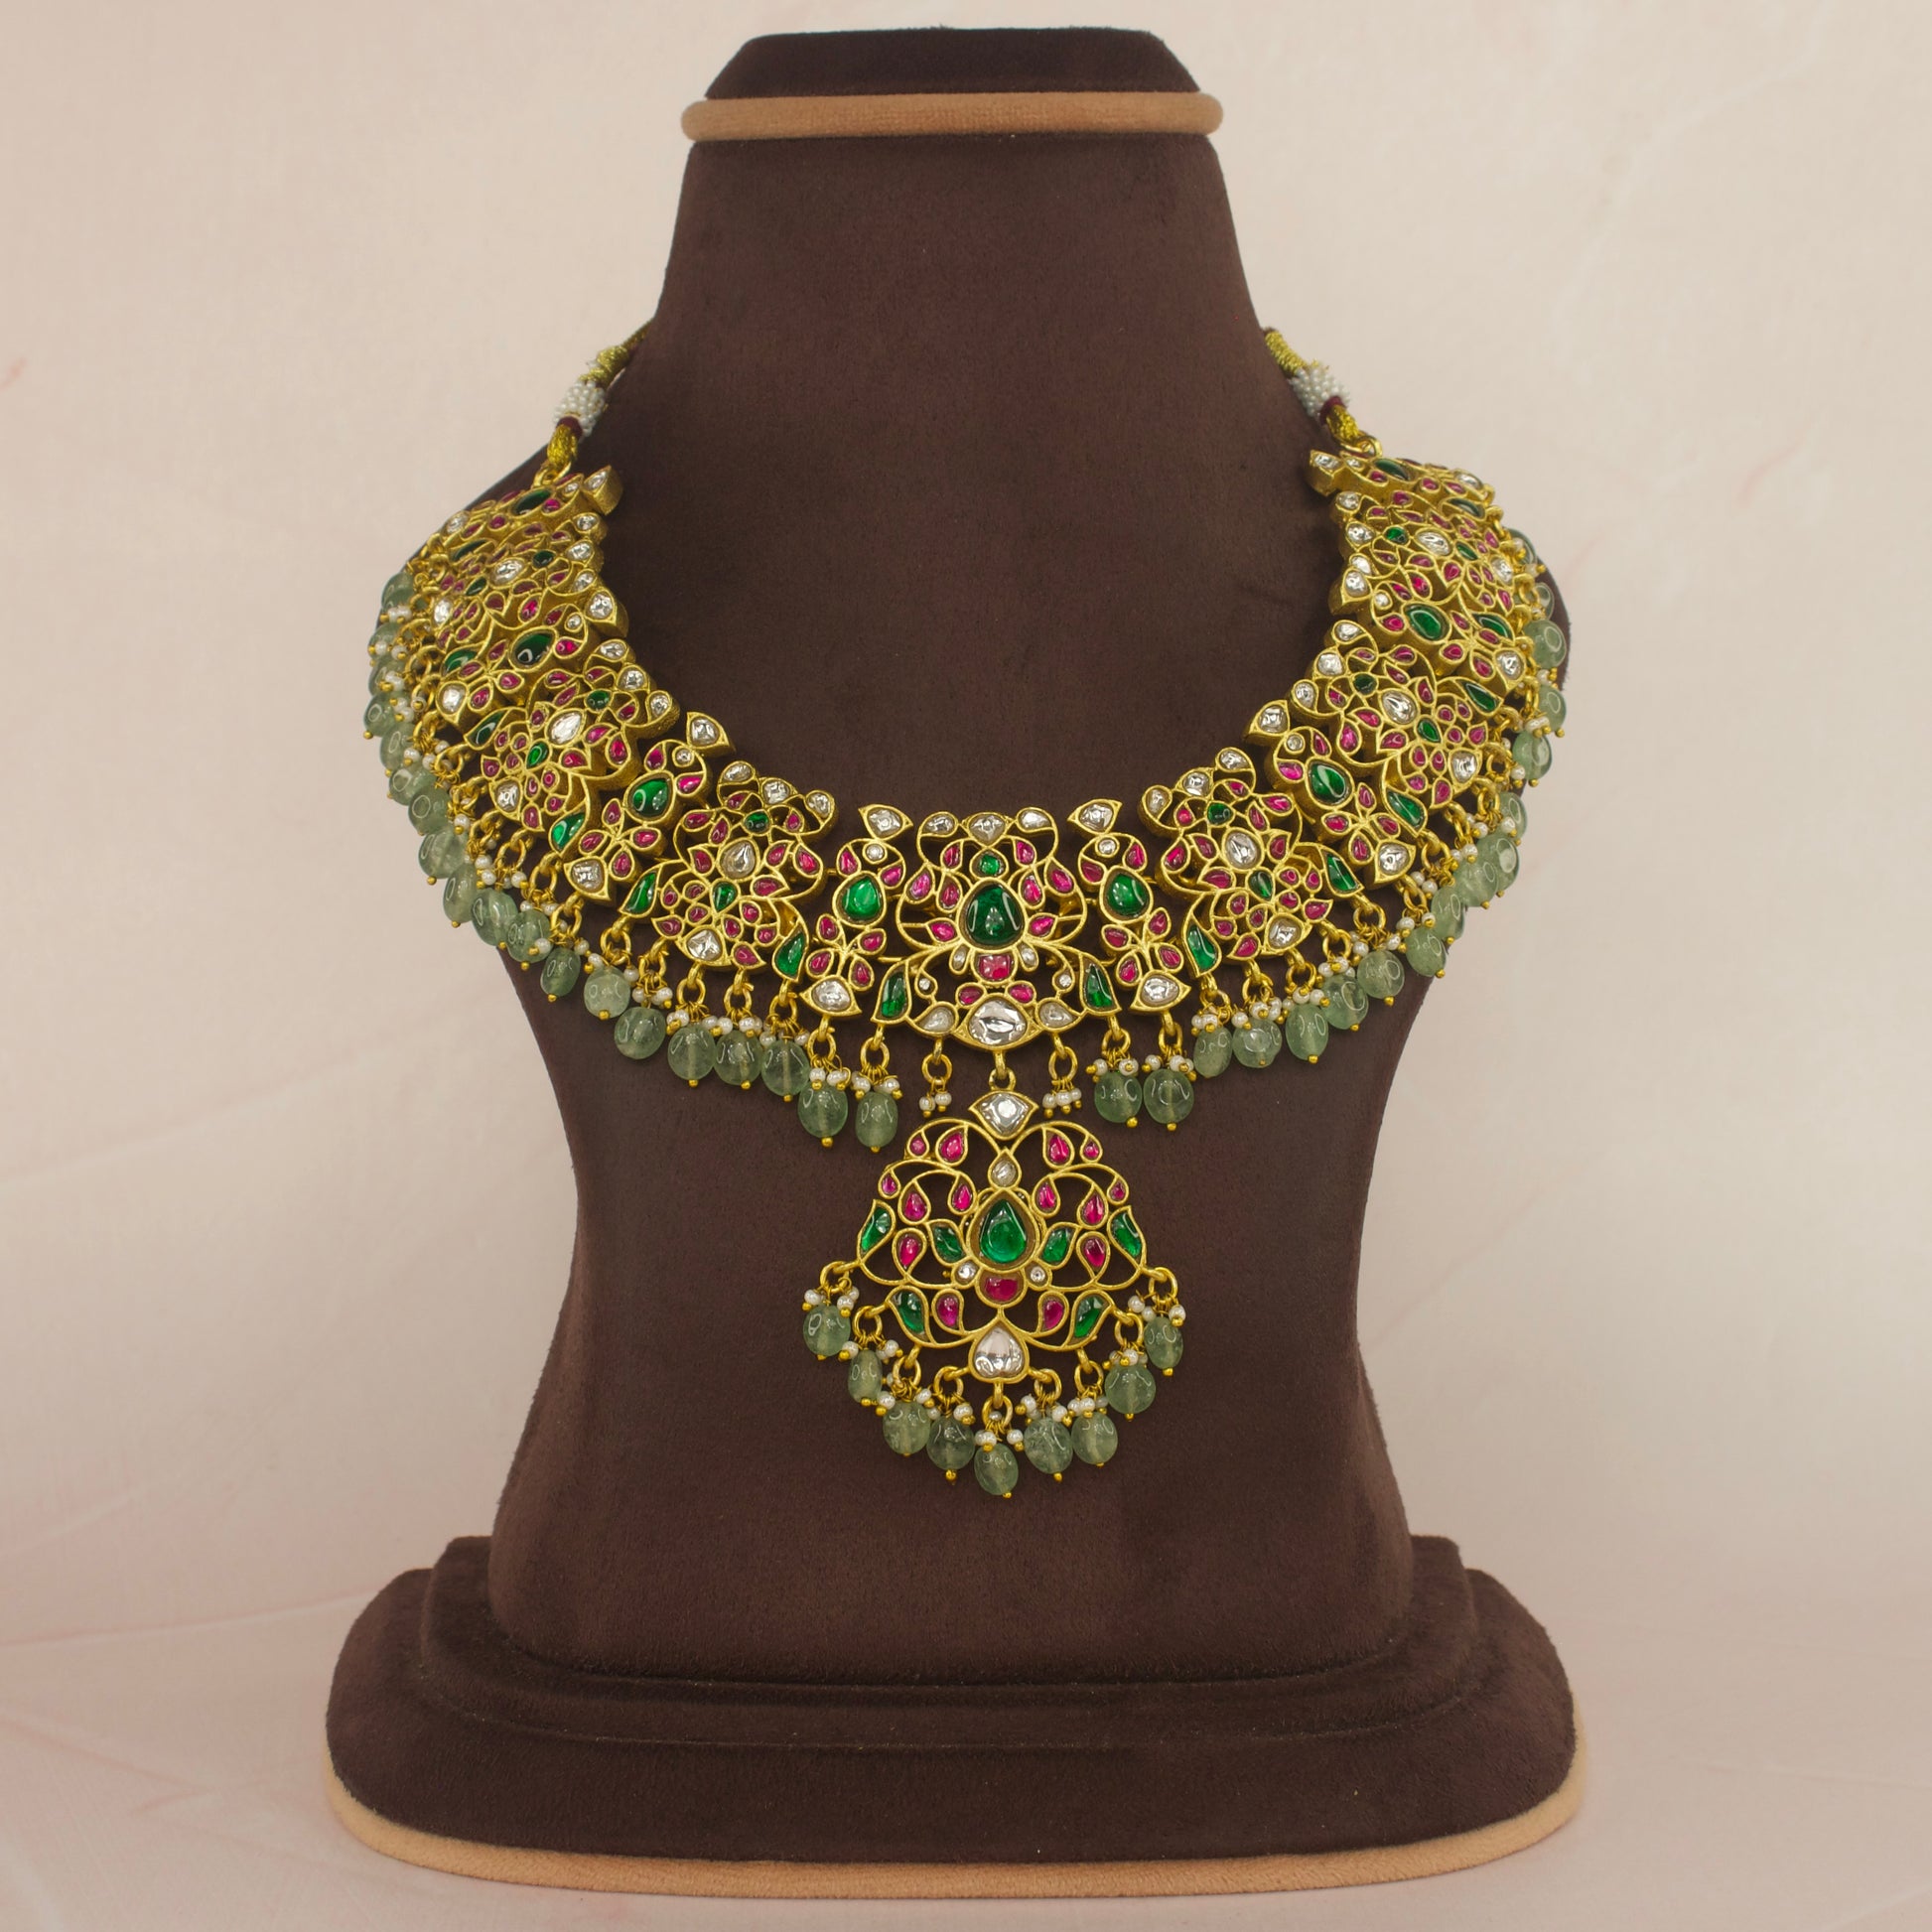 Majestic Jadau Kundan Necklace with Vibrant Green Drops with 22k gold plating This product belongs in jadau kundan jewellery category